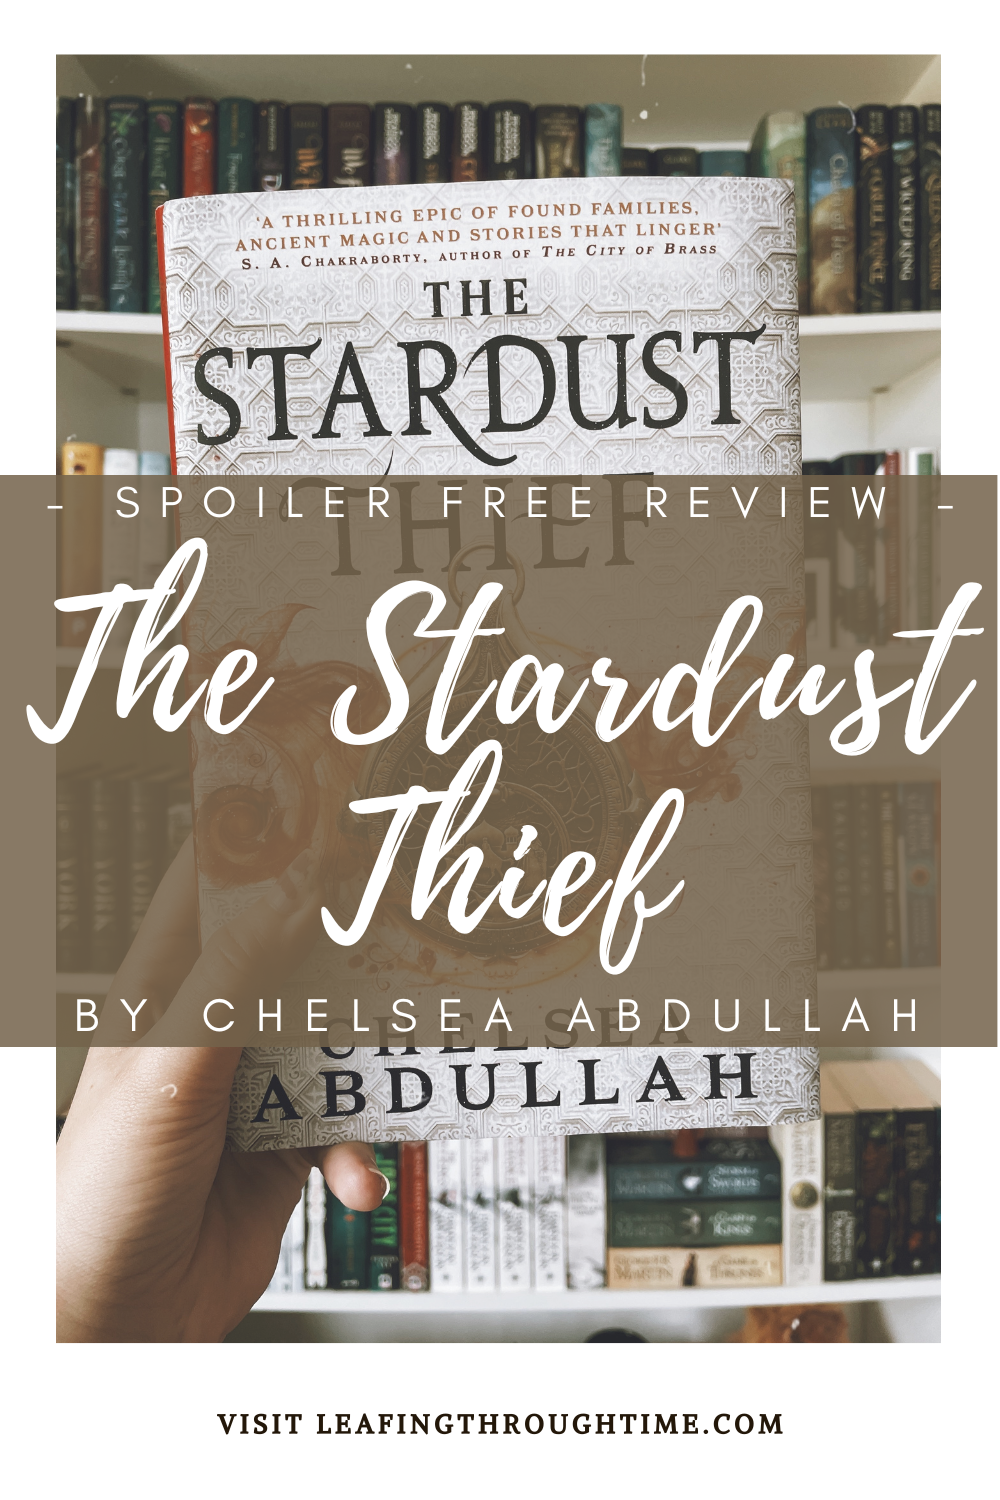 The Stardust Thief – Spoiler Free Review